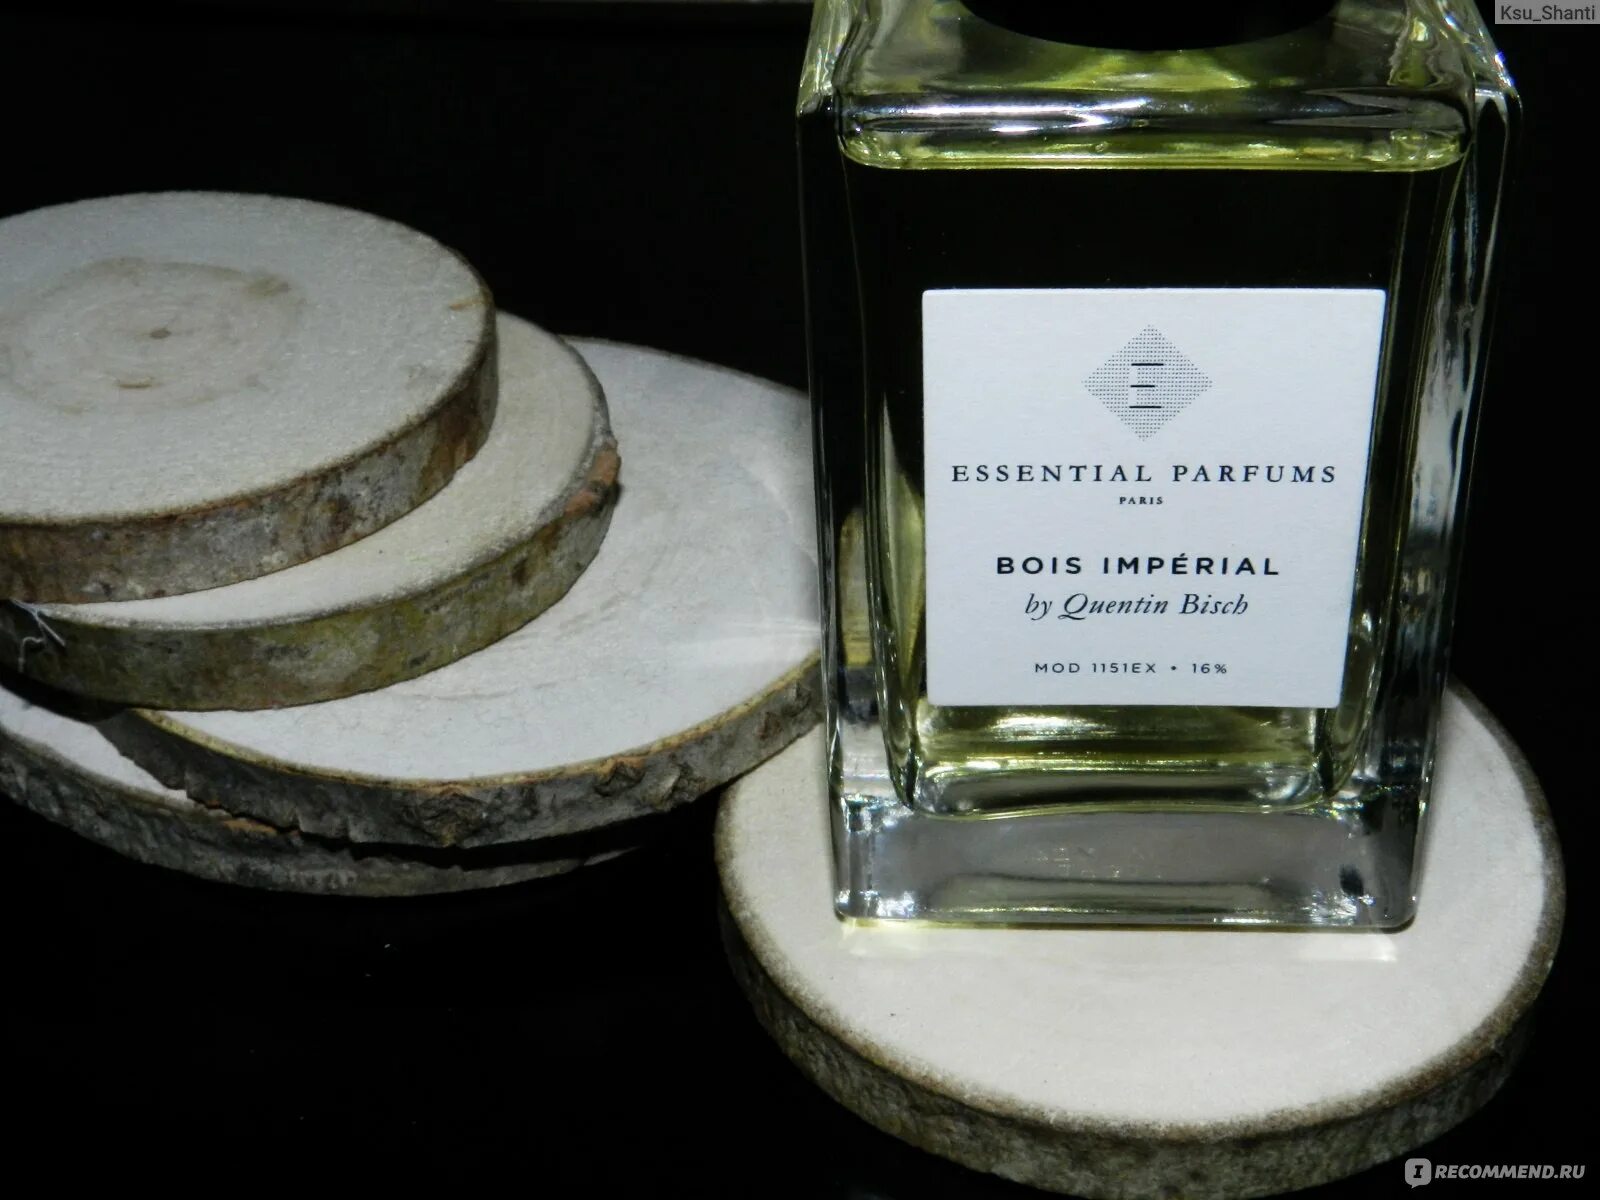 Аромат bois Imperial. Ессентиал Парфюм бойс Империал. Quentin bisch bois Imperial Essential Parfums. Эссенциале бойс Империал. Эссенциале парфюм бойс